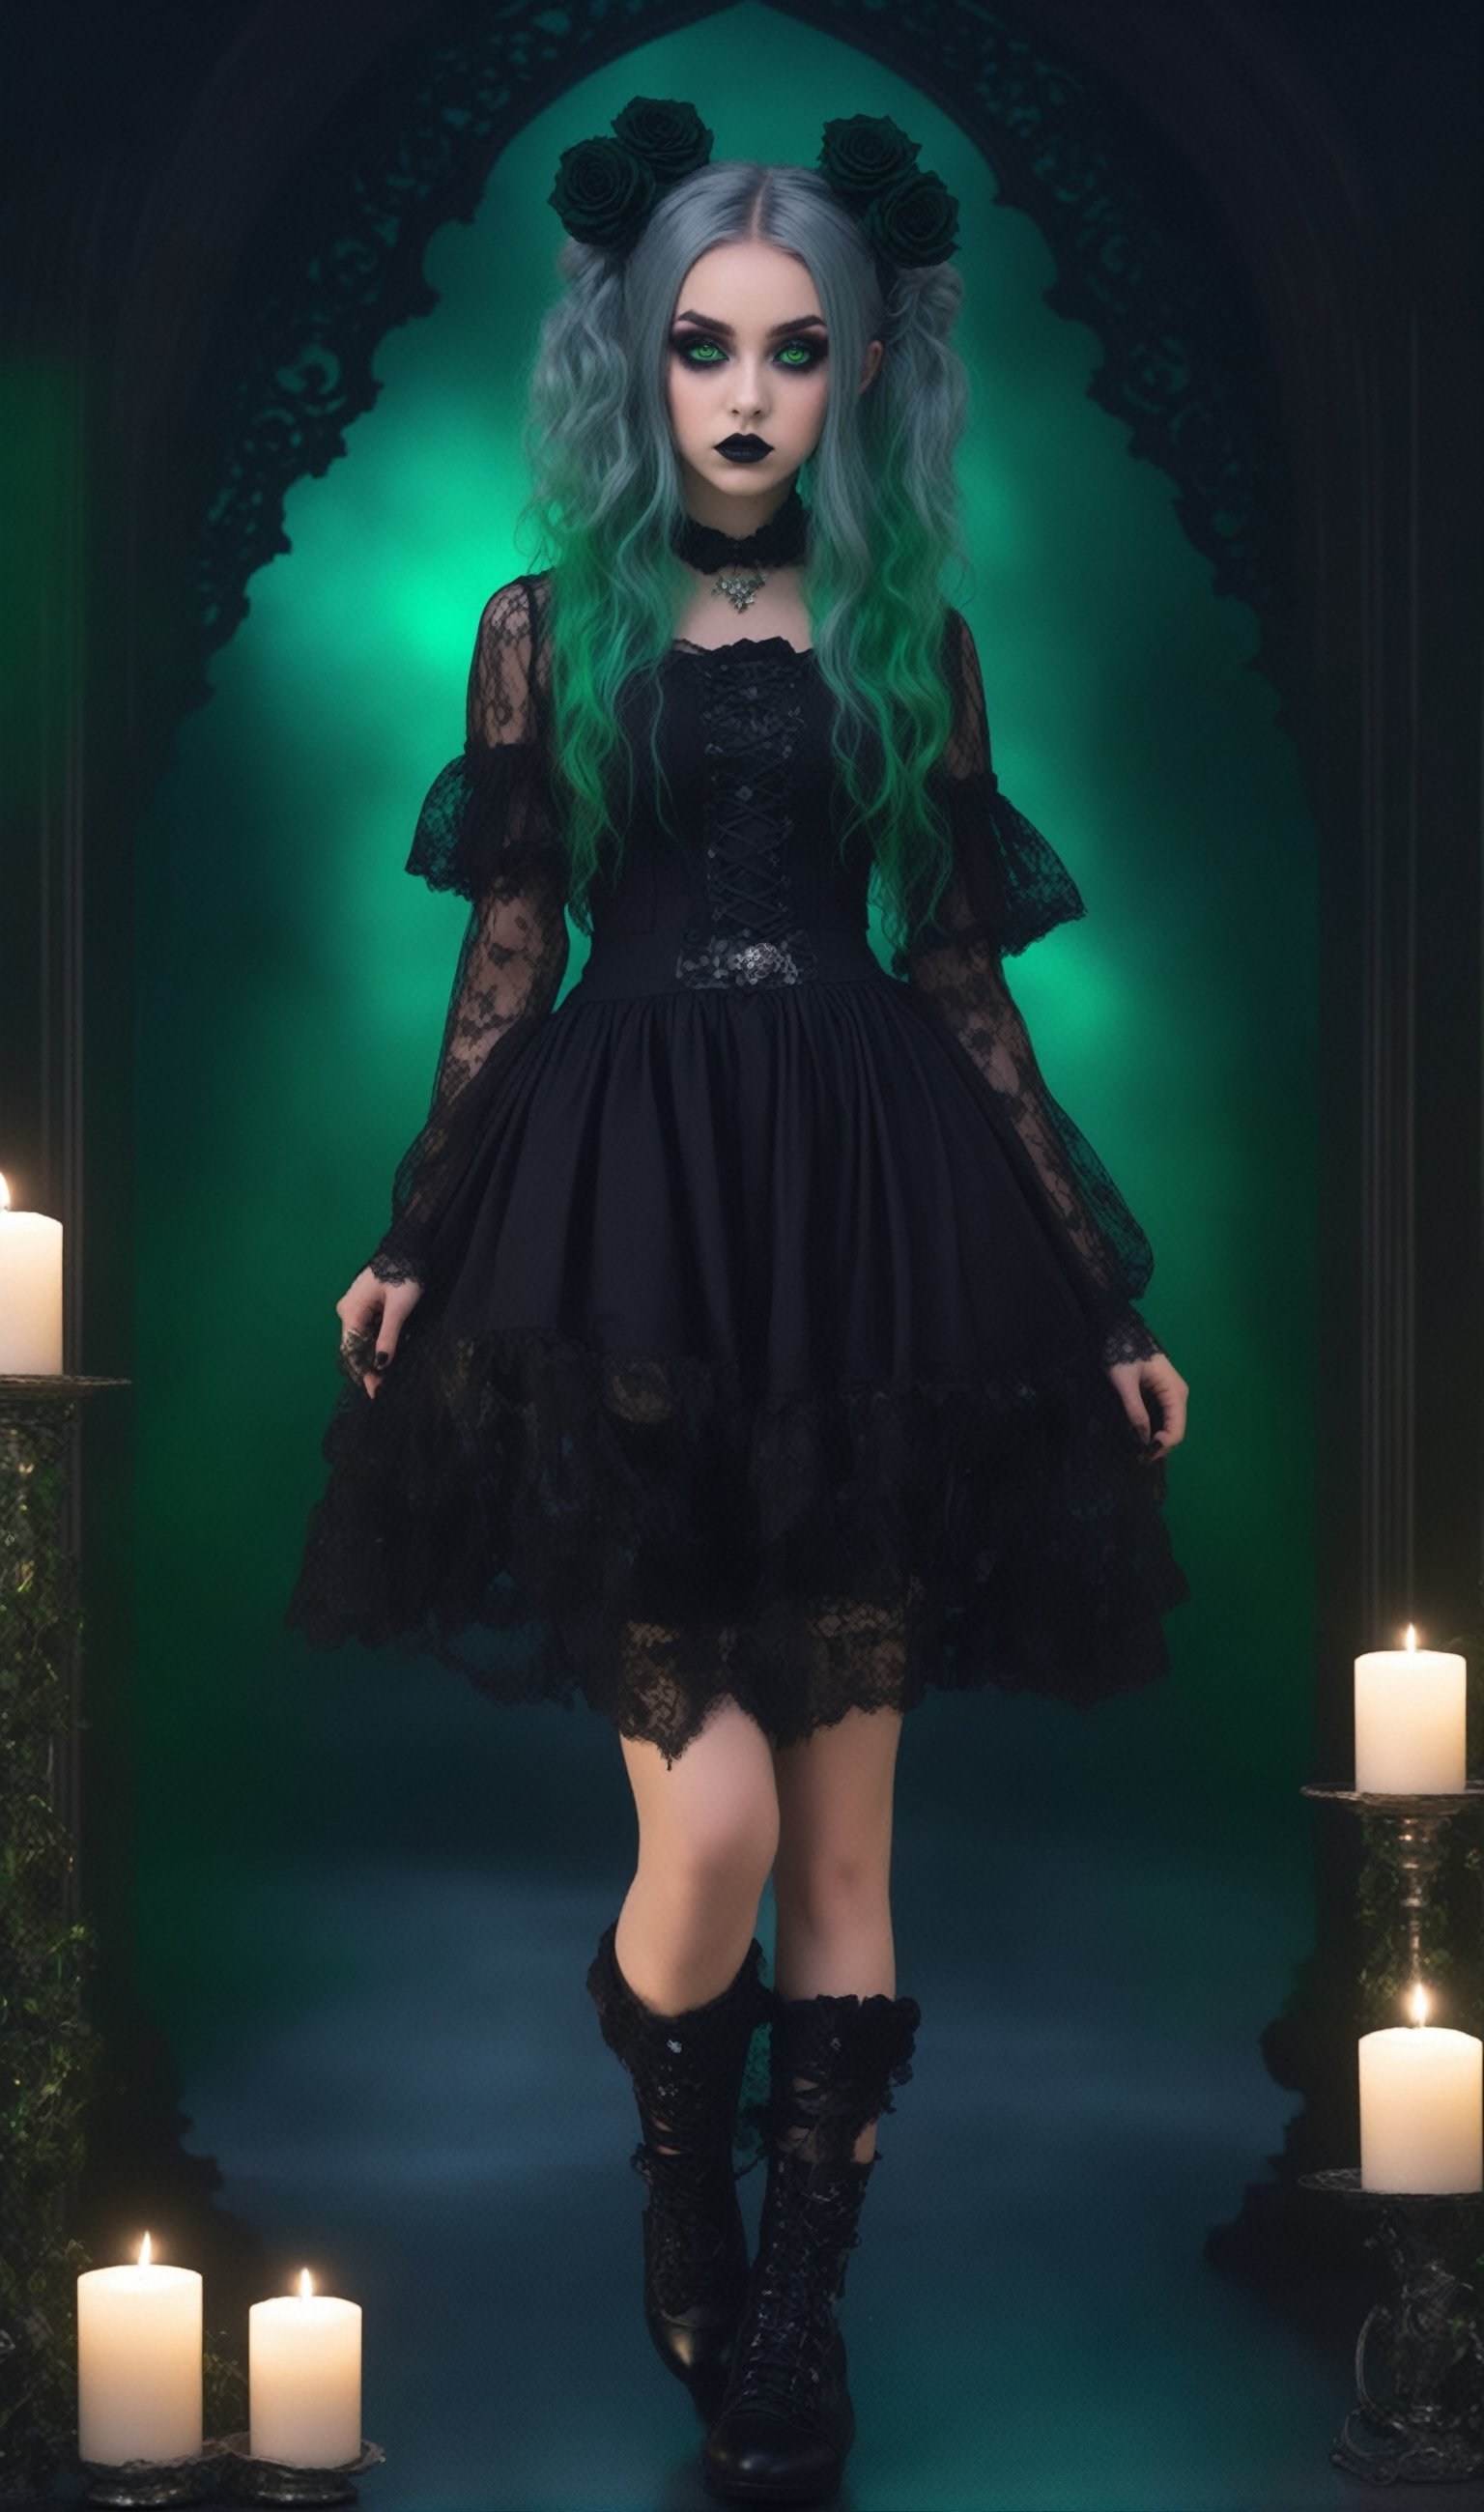 photorealistic concept art, 1girl, irish Young girl, green long hair, messy hair, elaborate hair, hair buns, serene expression on face, dark eye make up, elaborate outfit, black roses in hair, pastel gothic Fashion Girl,Grunge-Lolita Fashion, girly pastel lace blouse, high heel embroidered intricate boots,The ethereal glow, metallic accessories, and moody atmosphere create a mystical aura,
Gothic Lolita long lace Skirt, her look exudes dark glamour,natural volumetric cinematic perfect light,pastelbg,pastel goth, intricate background, candles, realistic large gray cats with fluffy long hair with glowing green eyes at the girl's feet,